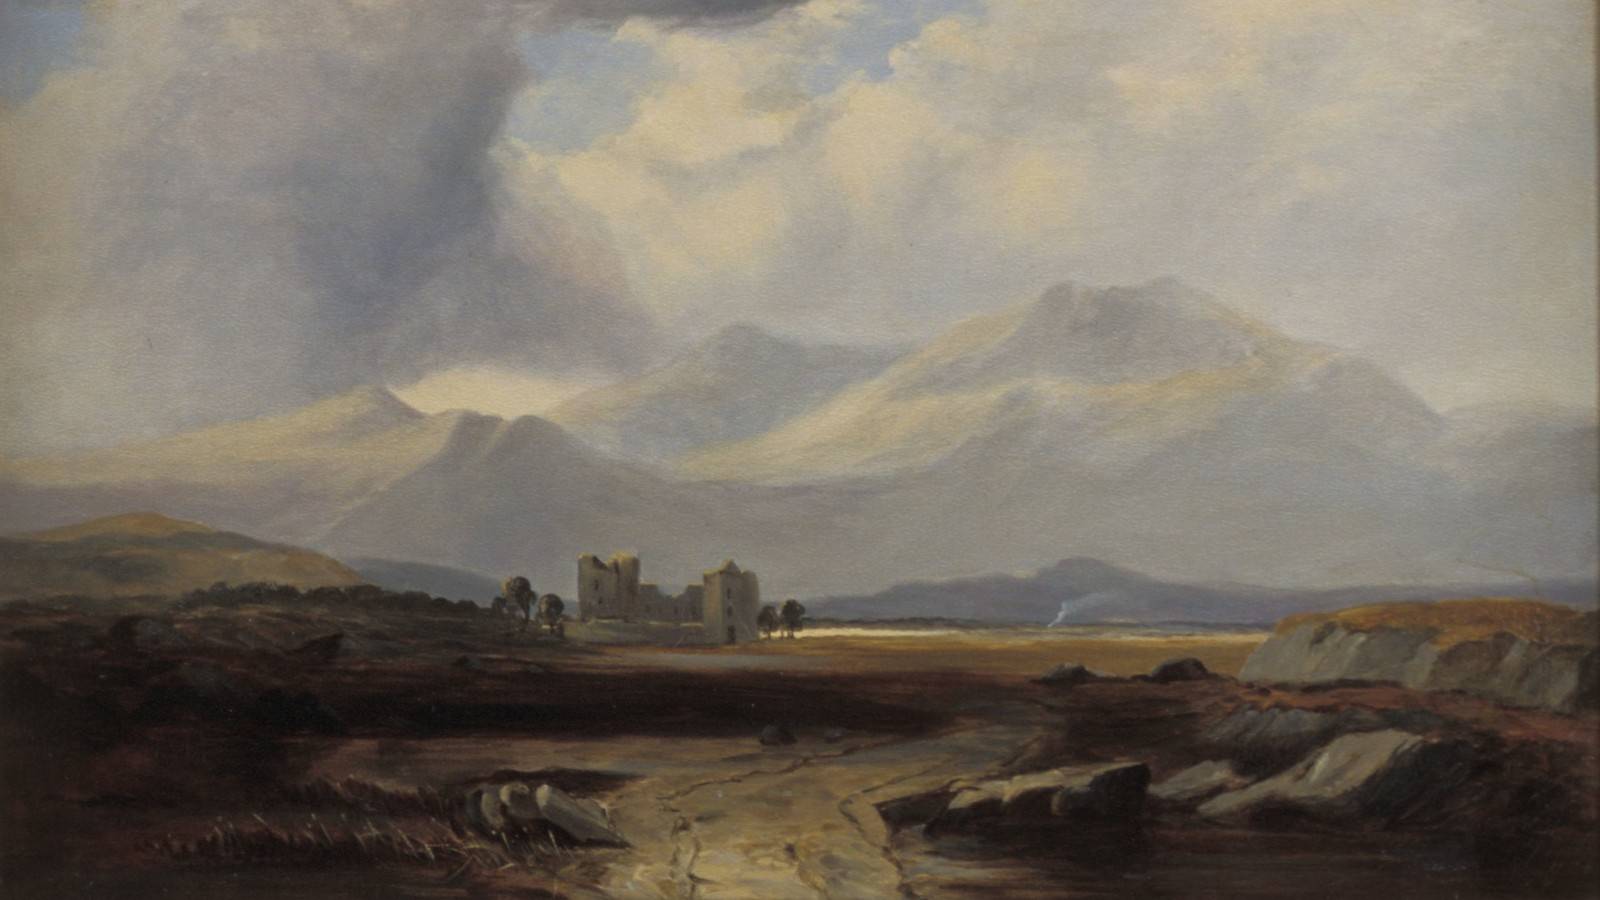 The 19th-century painting Loch Awe, Argyll and Bute by Horatio McCulloch (1805-1867)